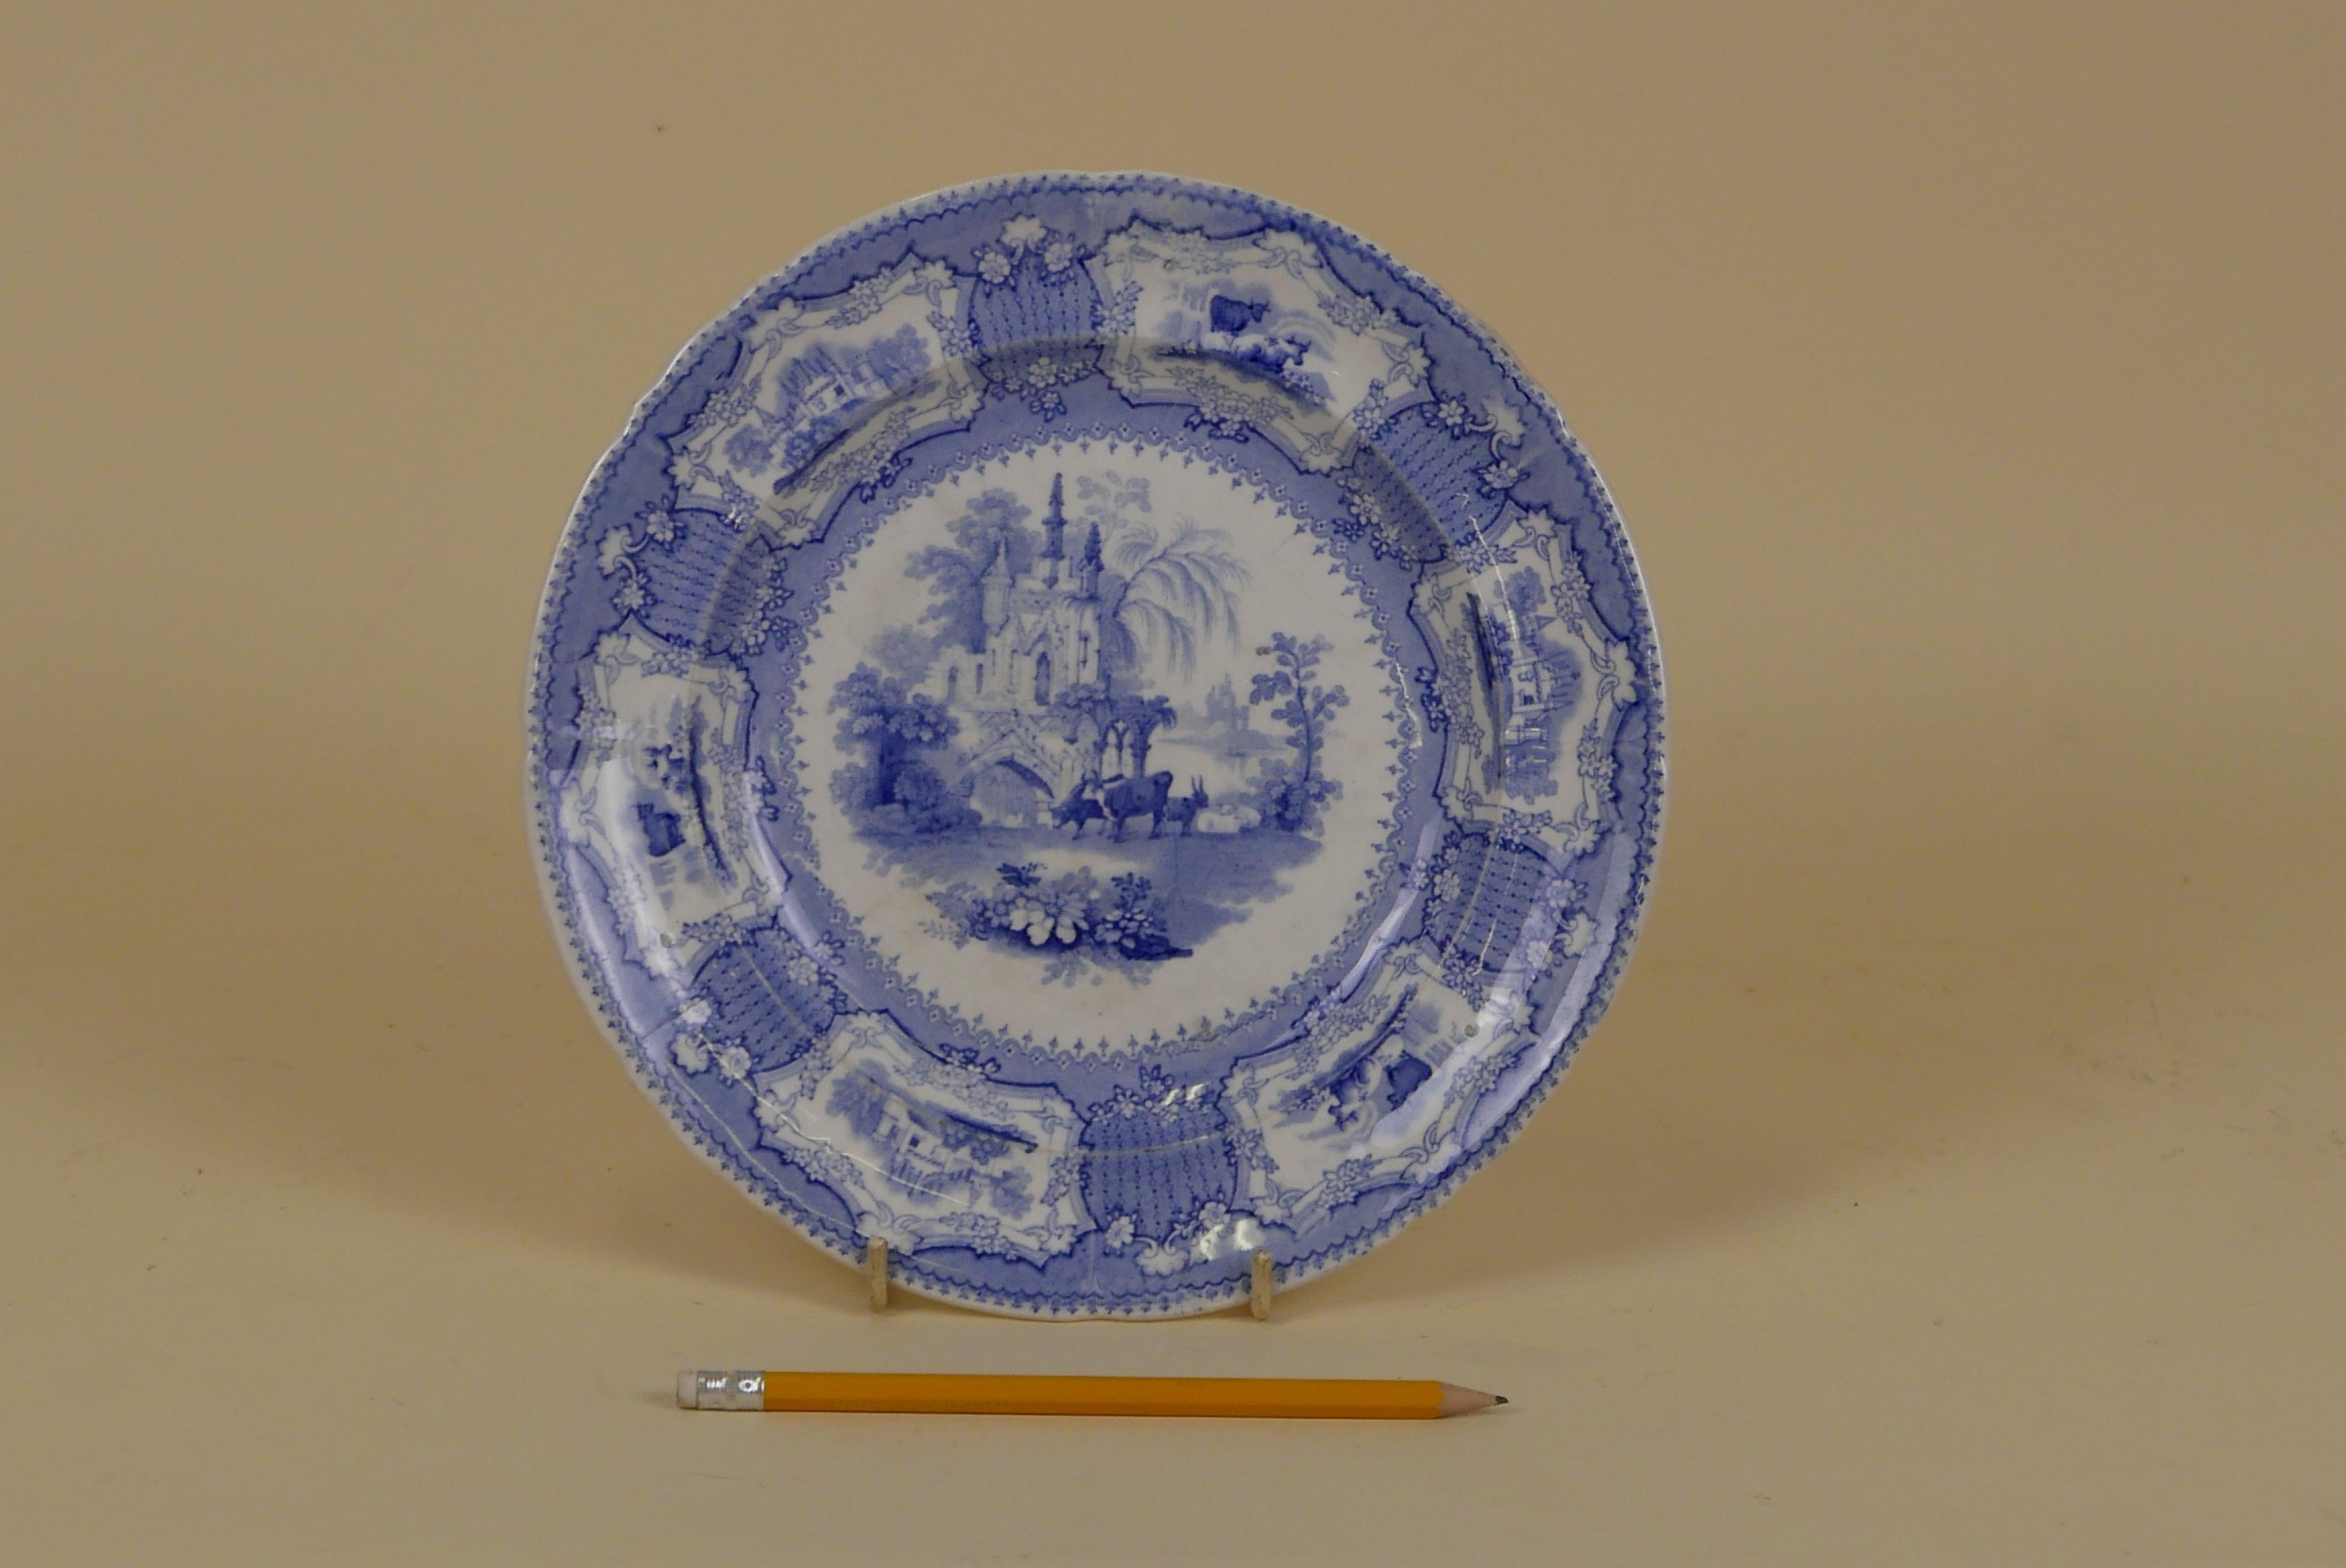 Early Victorian antique English light blue and white transfer dinner plate made in Staffordshire and printed in the 